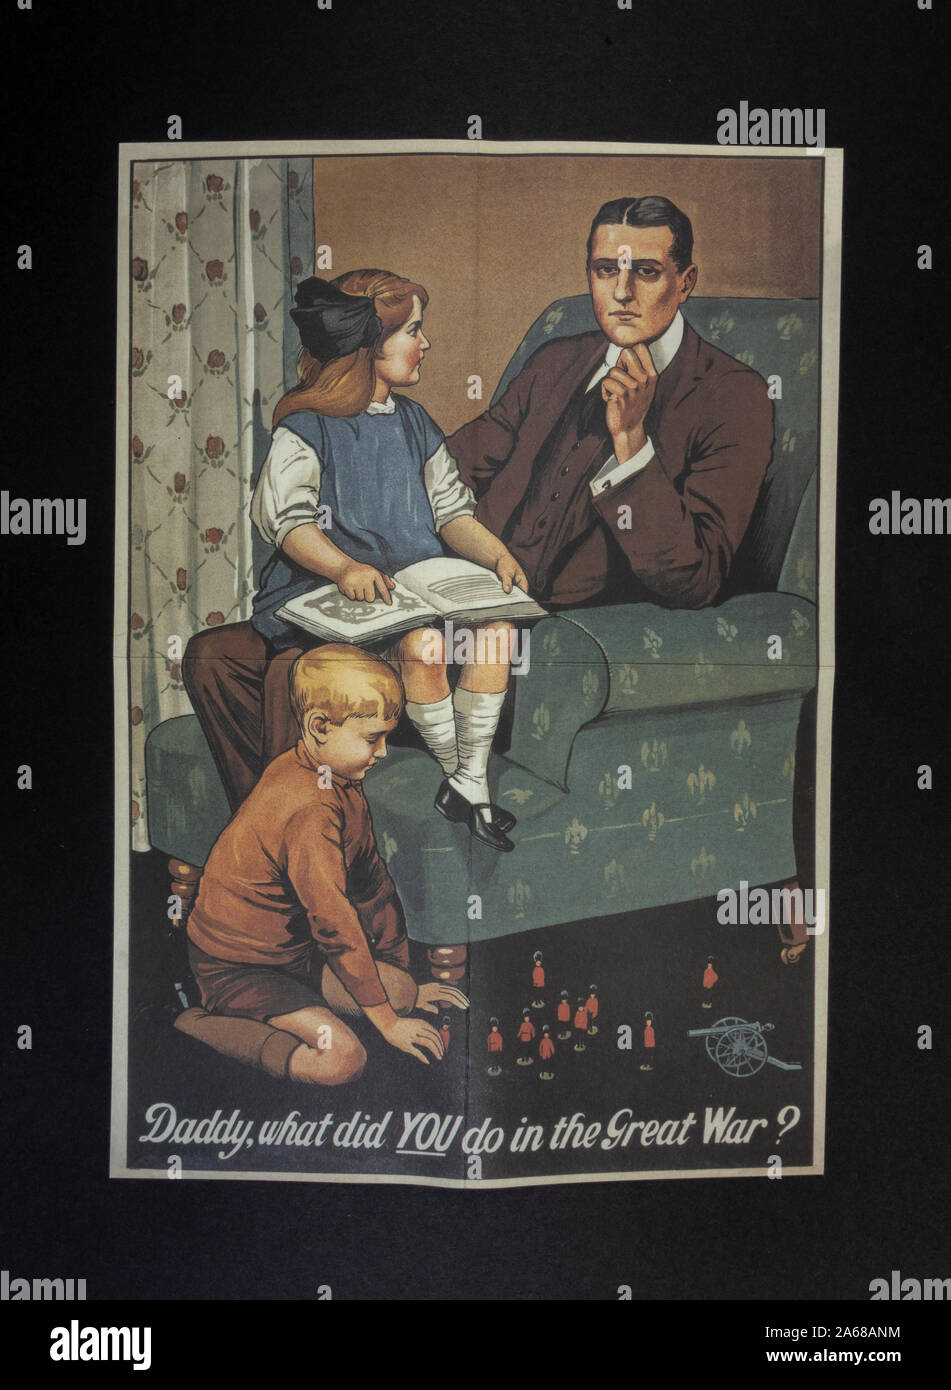 'Daddy, what did YOU do in the Great War?' recruitment poster, a piece of replica memorabilia from the World War One era. Stock Photo